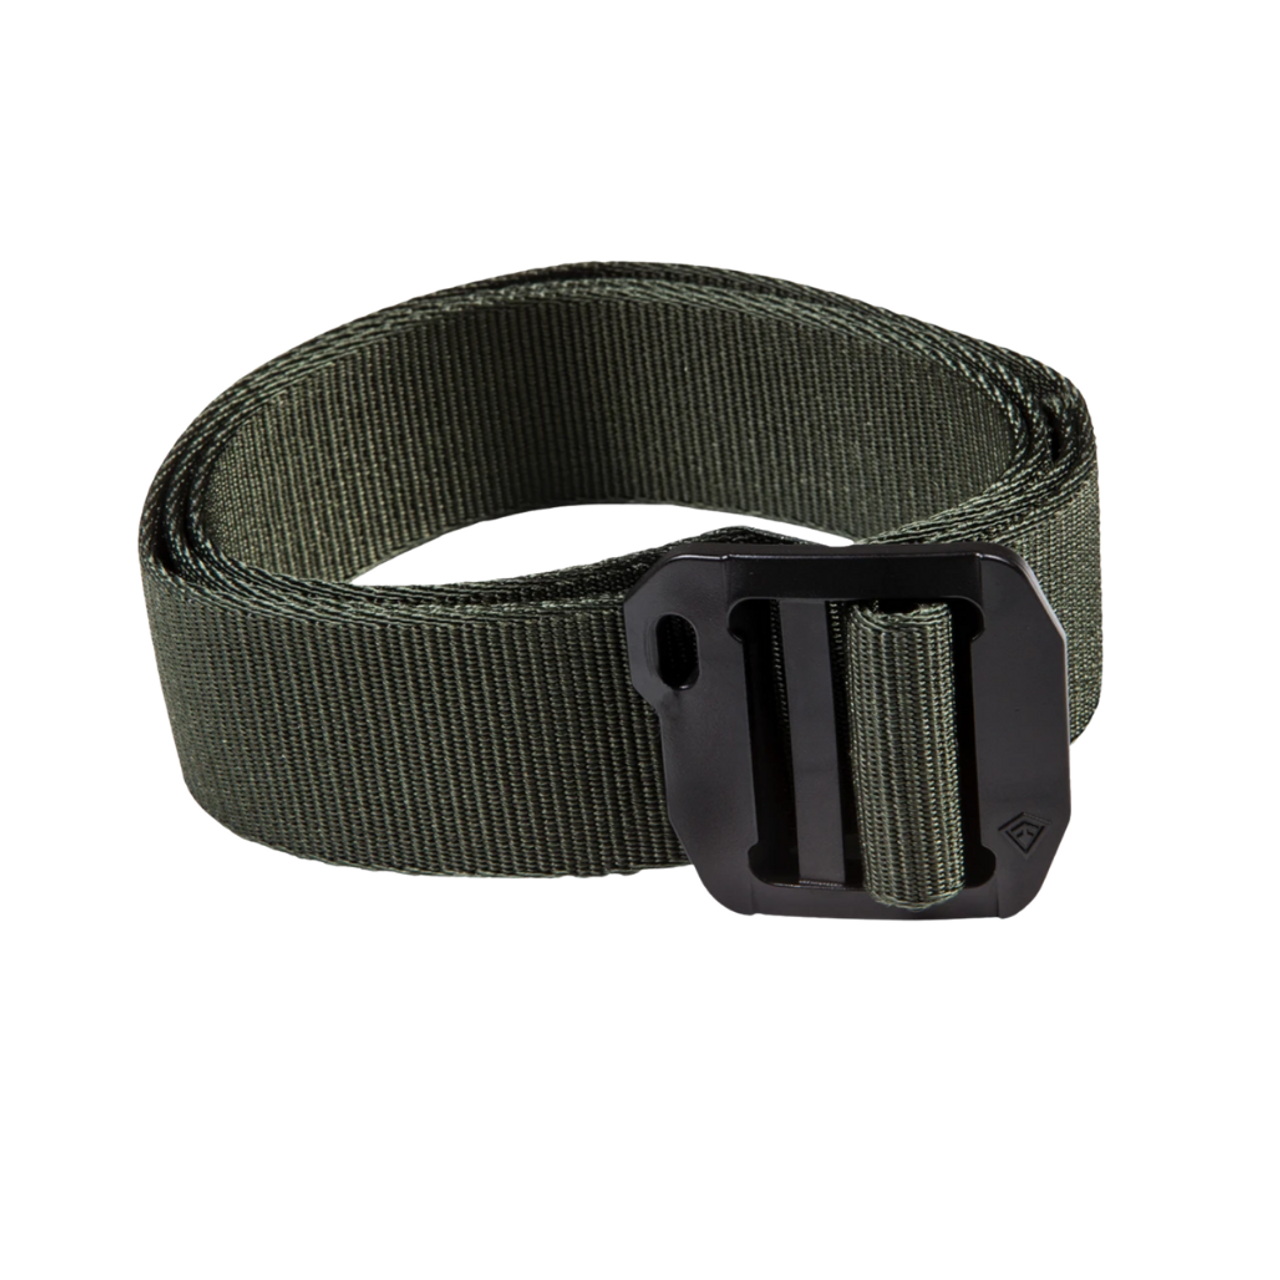 The BDU Belt 1.75” is designed to work for you. From its extra durable non-metal buckle, to pre-curved nylon webbing for comfort, this belt sets the bar high.